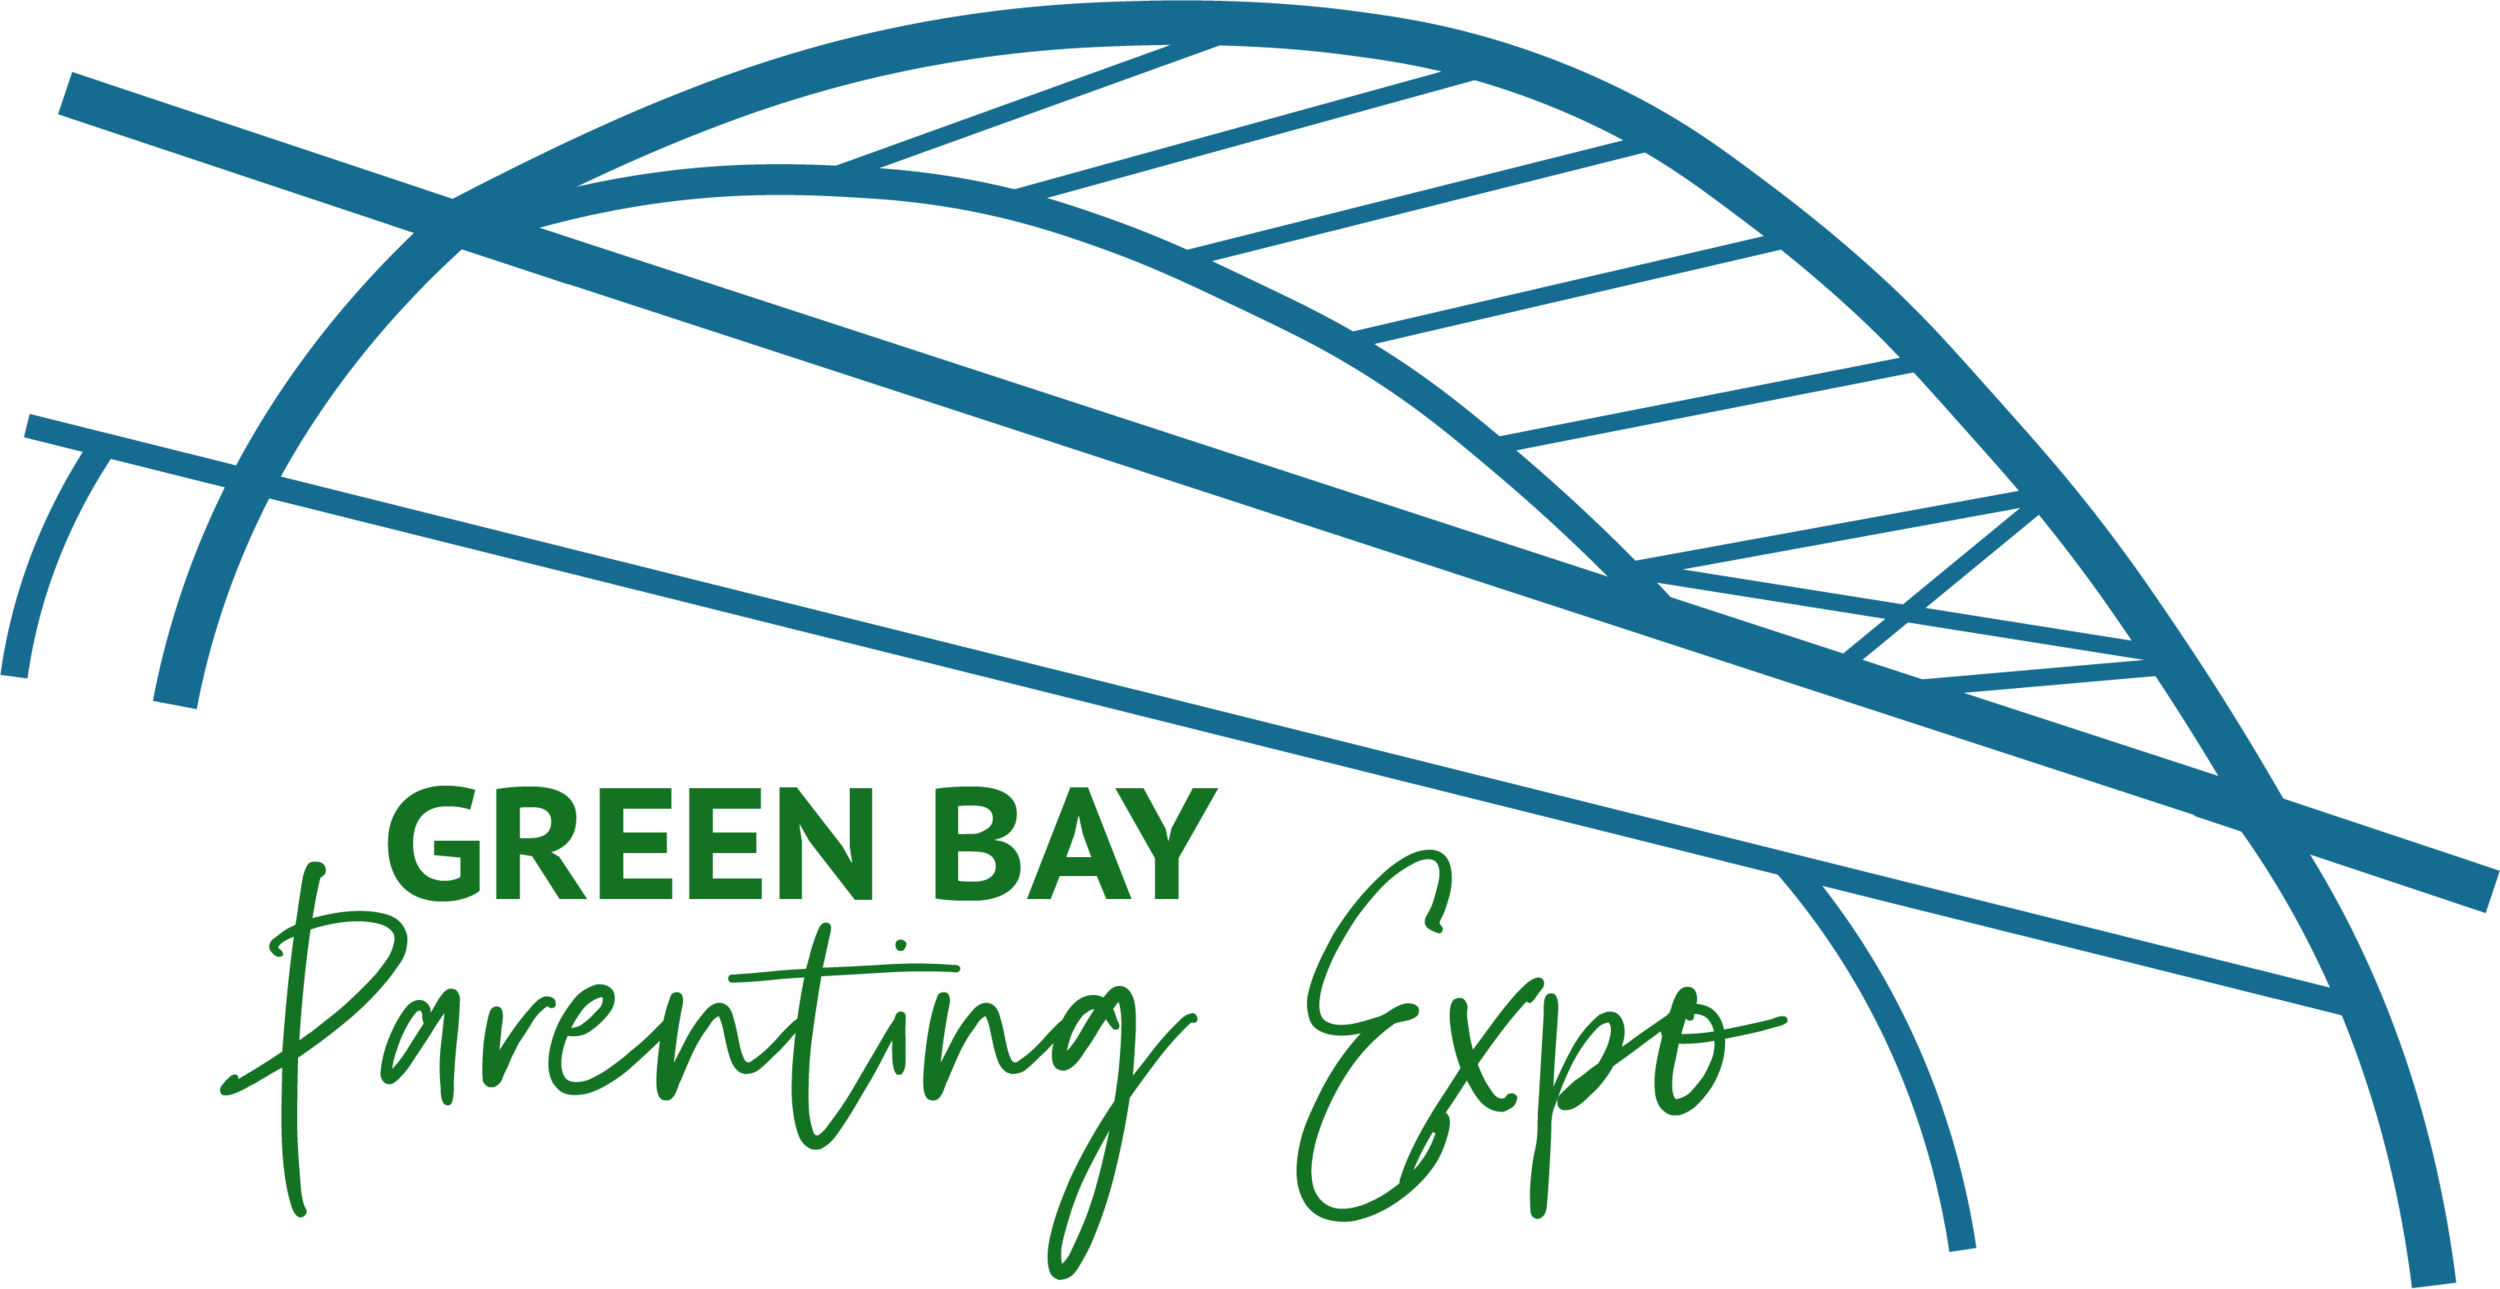 Green Bay Parenting Expo | Green Bay Resources for Parents